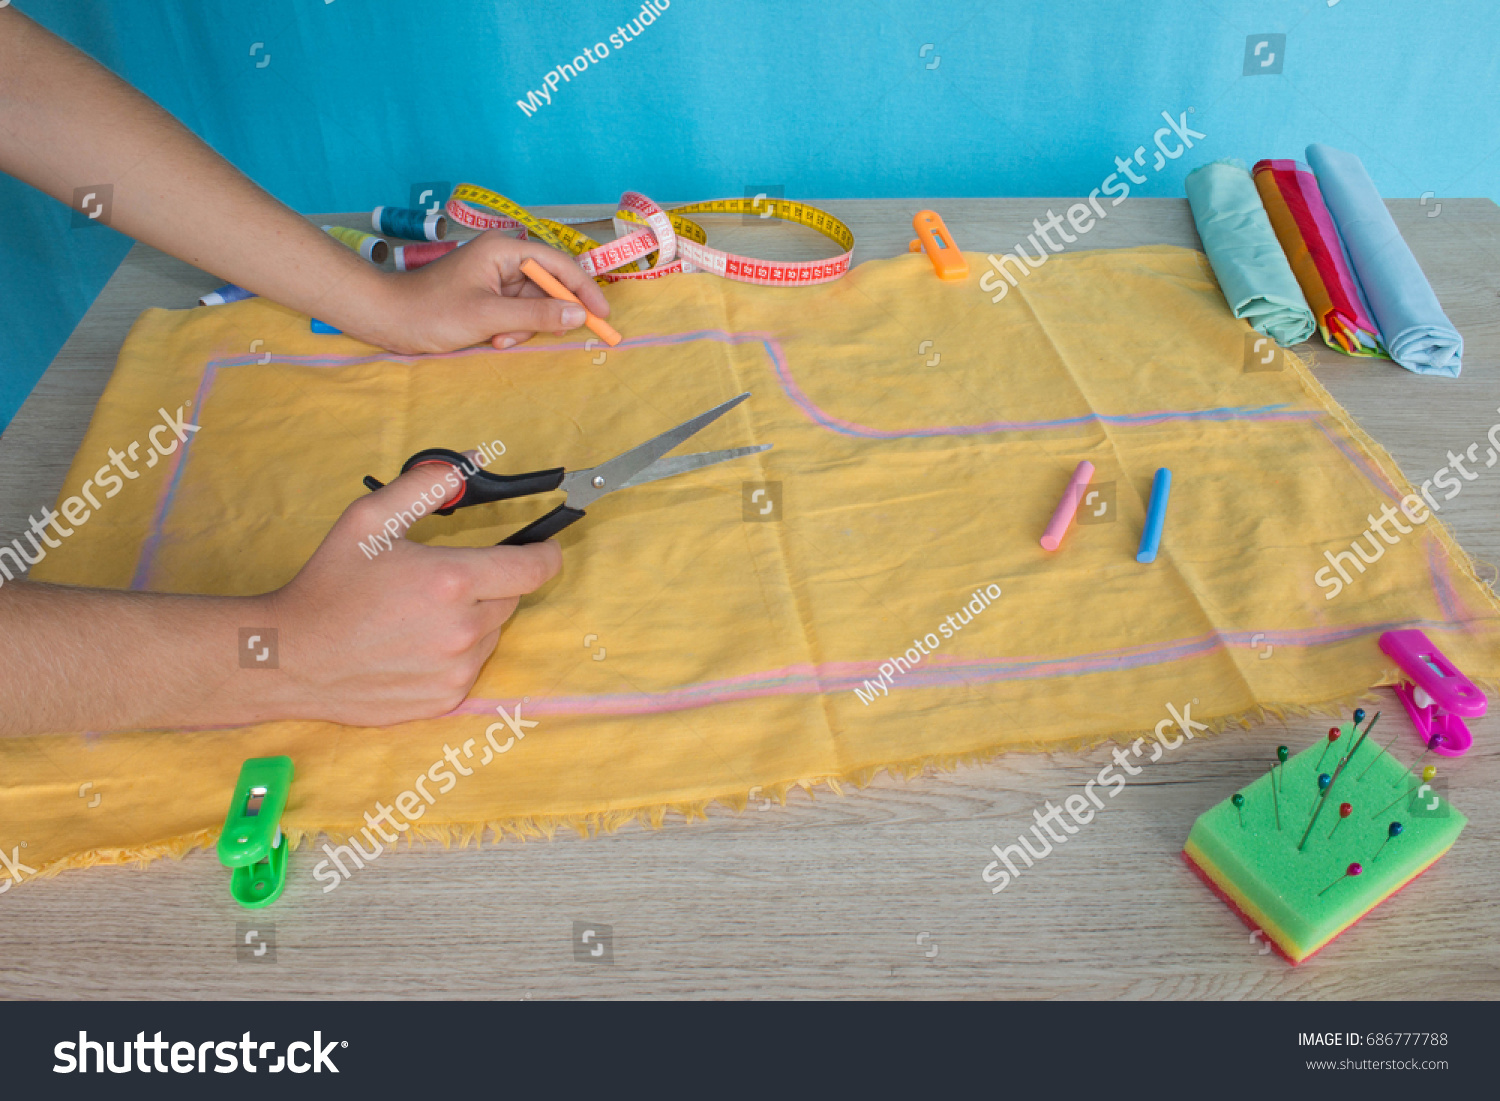 Tailor cutting fabric using large scissors or shears as he follows the chalk markings of the pattern, close up of his hands. Woman's Hand Sewing Quilt #686777788